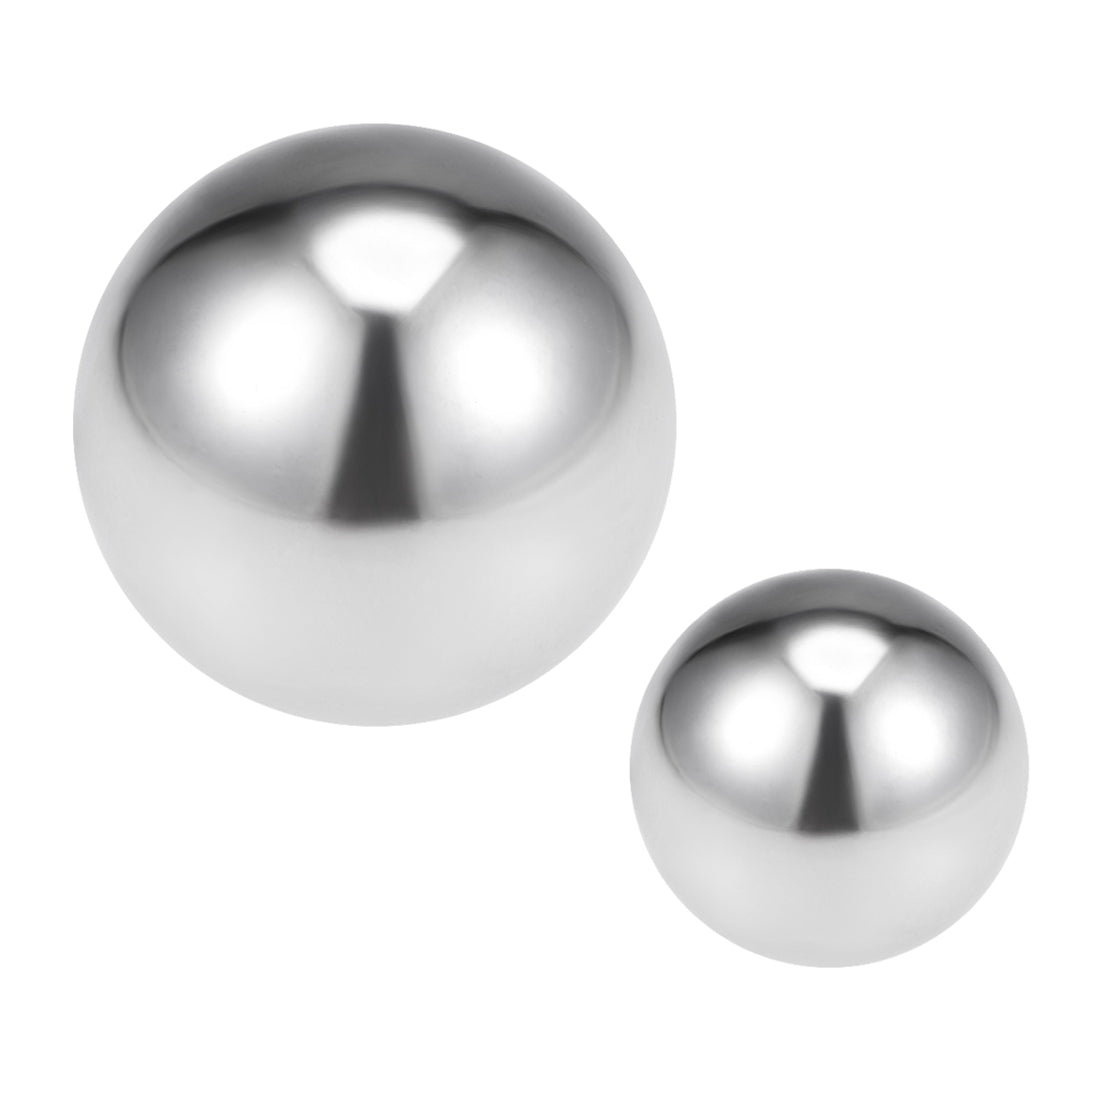 Uxcell Uxcell 30mm Bearing Balls 304 Stainless Steel G100 Precision Balls 4pcs